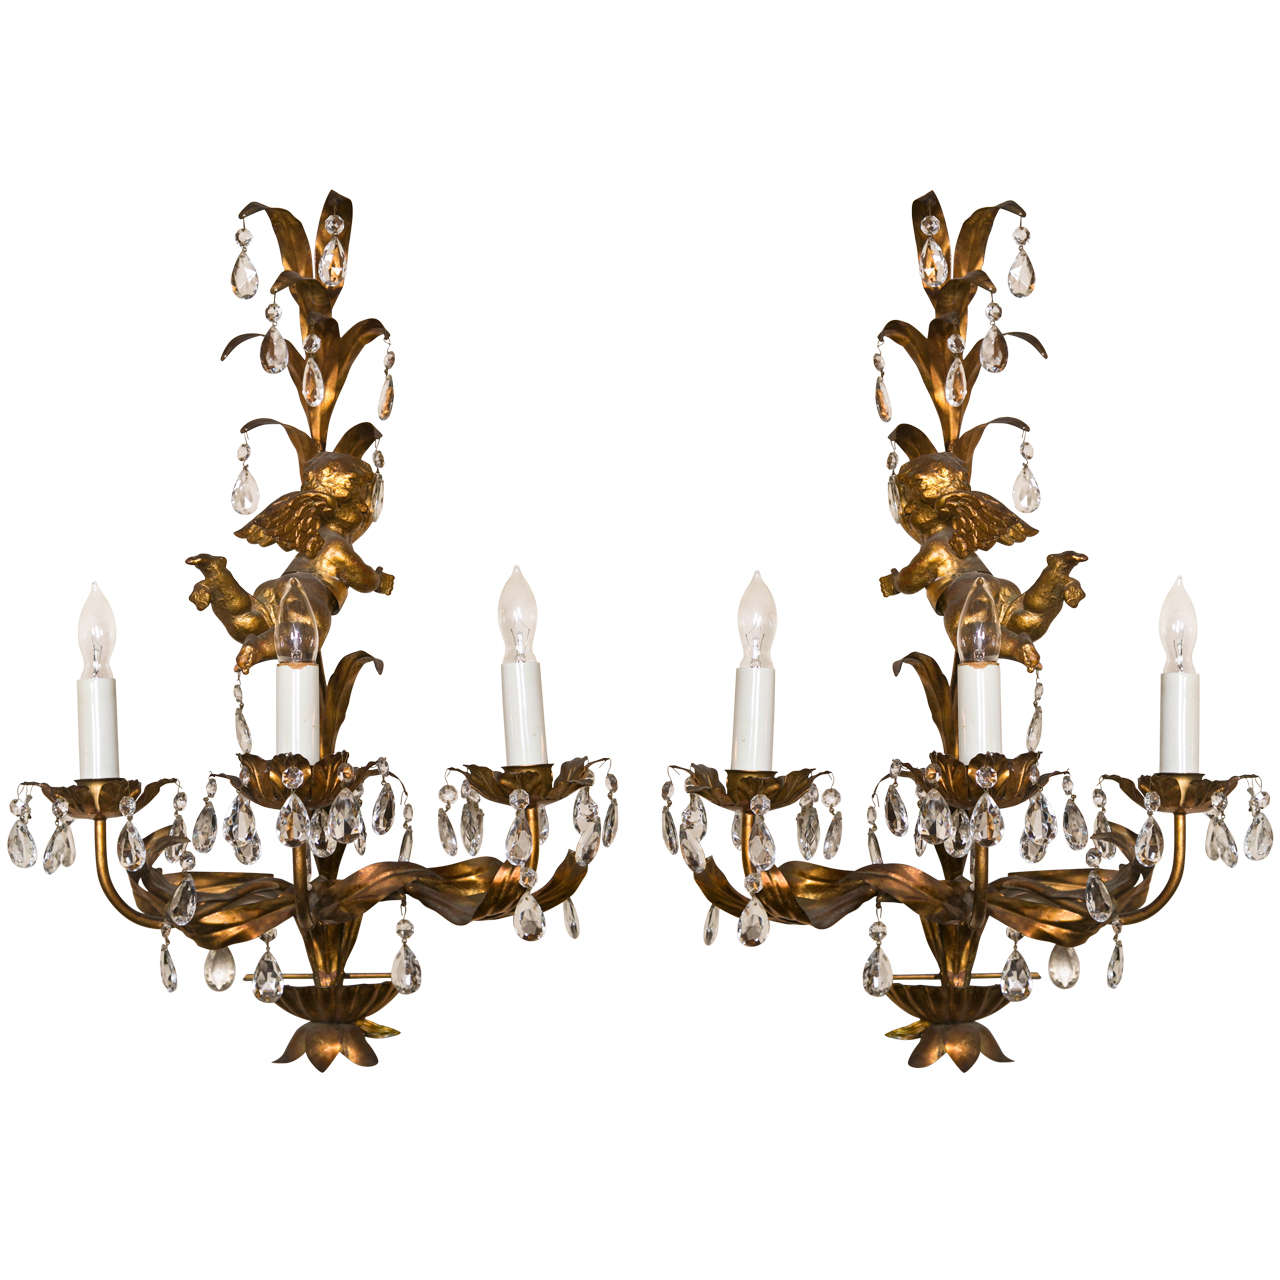 French Marie Therese Style Gilt-Brass Three-Light Wall Sconces Cherub Figures